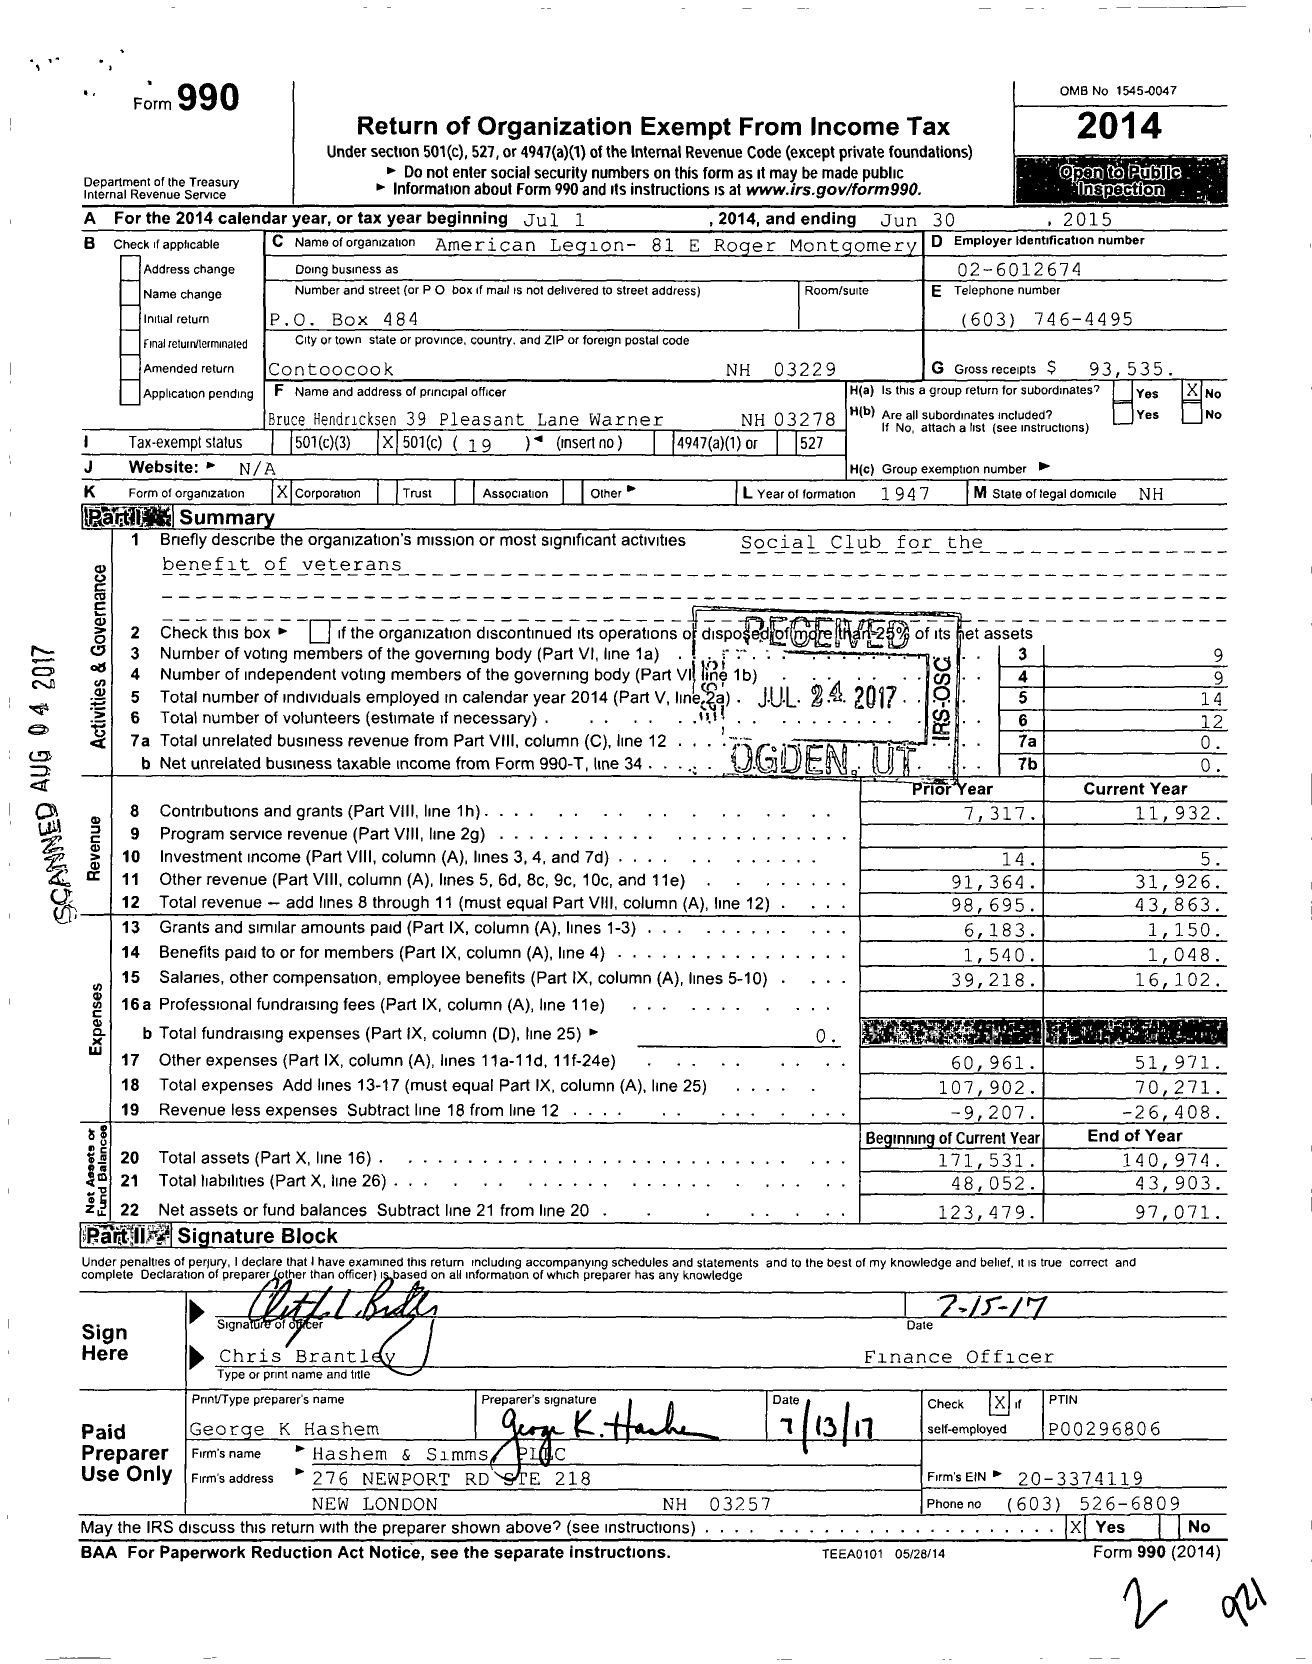 Image of first page of 2014 Form 990O for American Legion 81 E Roger Montgomery